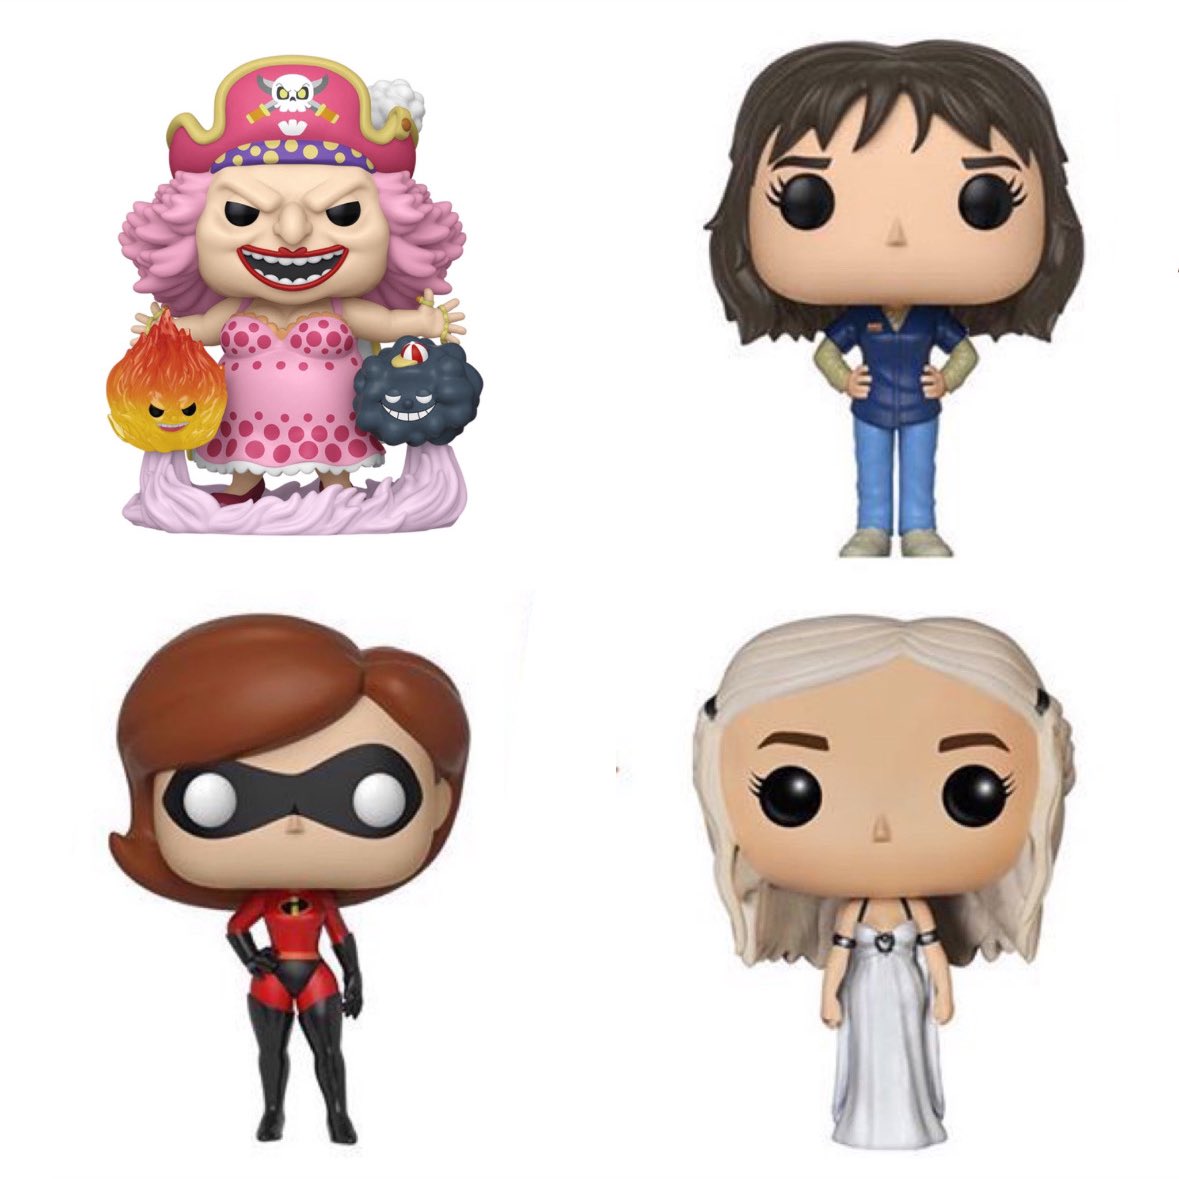 Who’s the best Funko Mommy? Take your pick ~ one of these or … #MothersDay #FPN #FunkoPOPNews #Funko #POP #POPVinyl #FunkoPOP #FunkoSoda